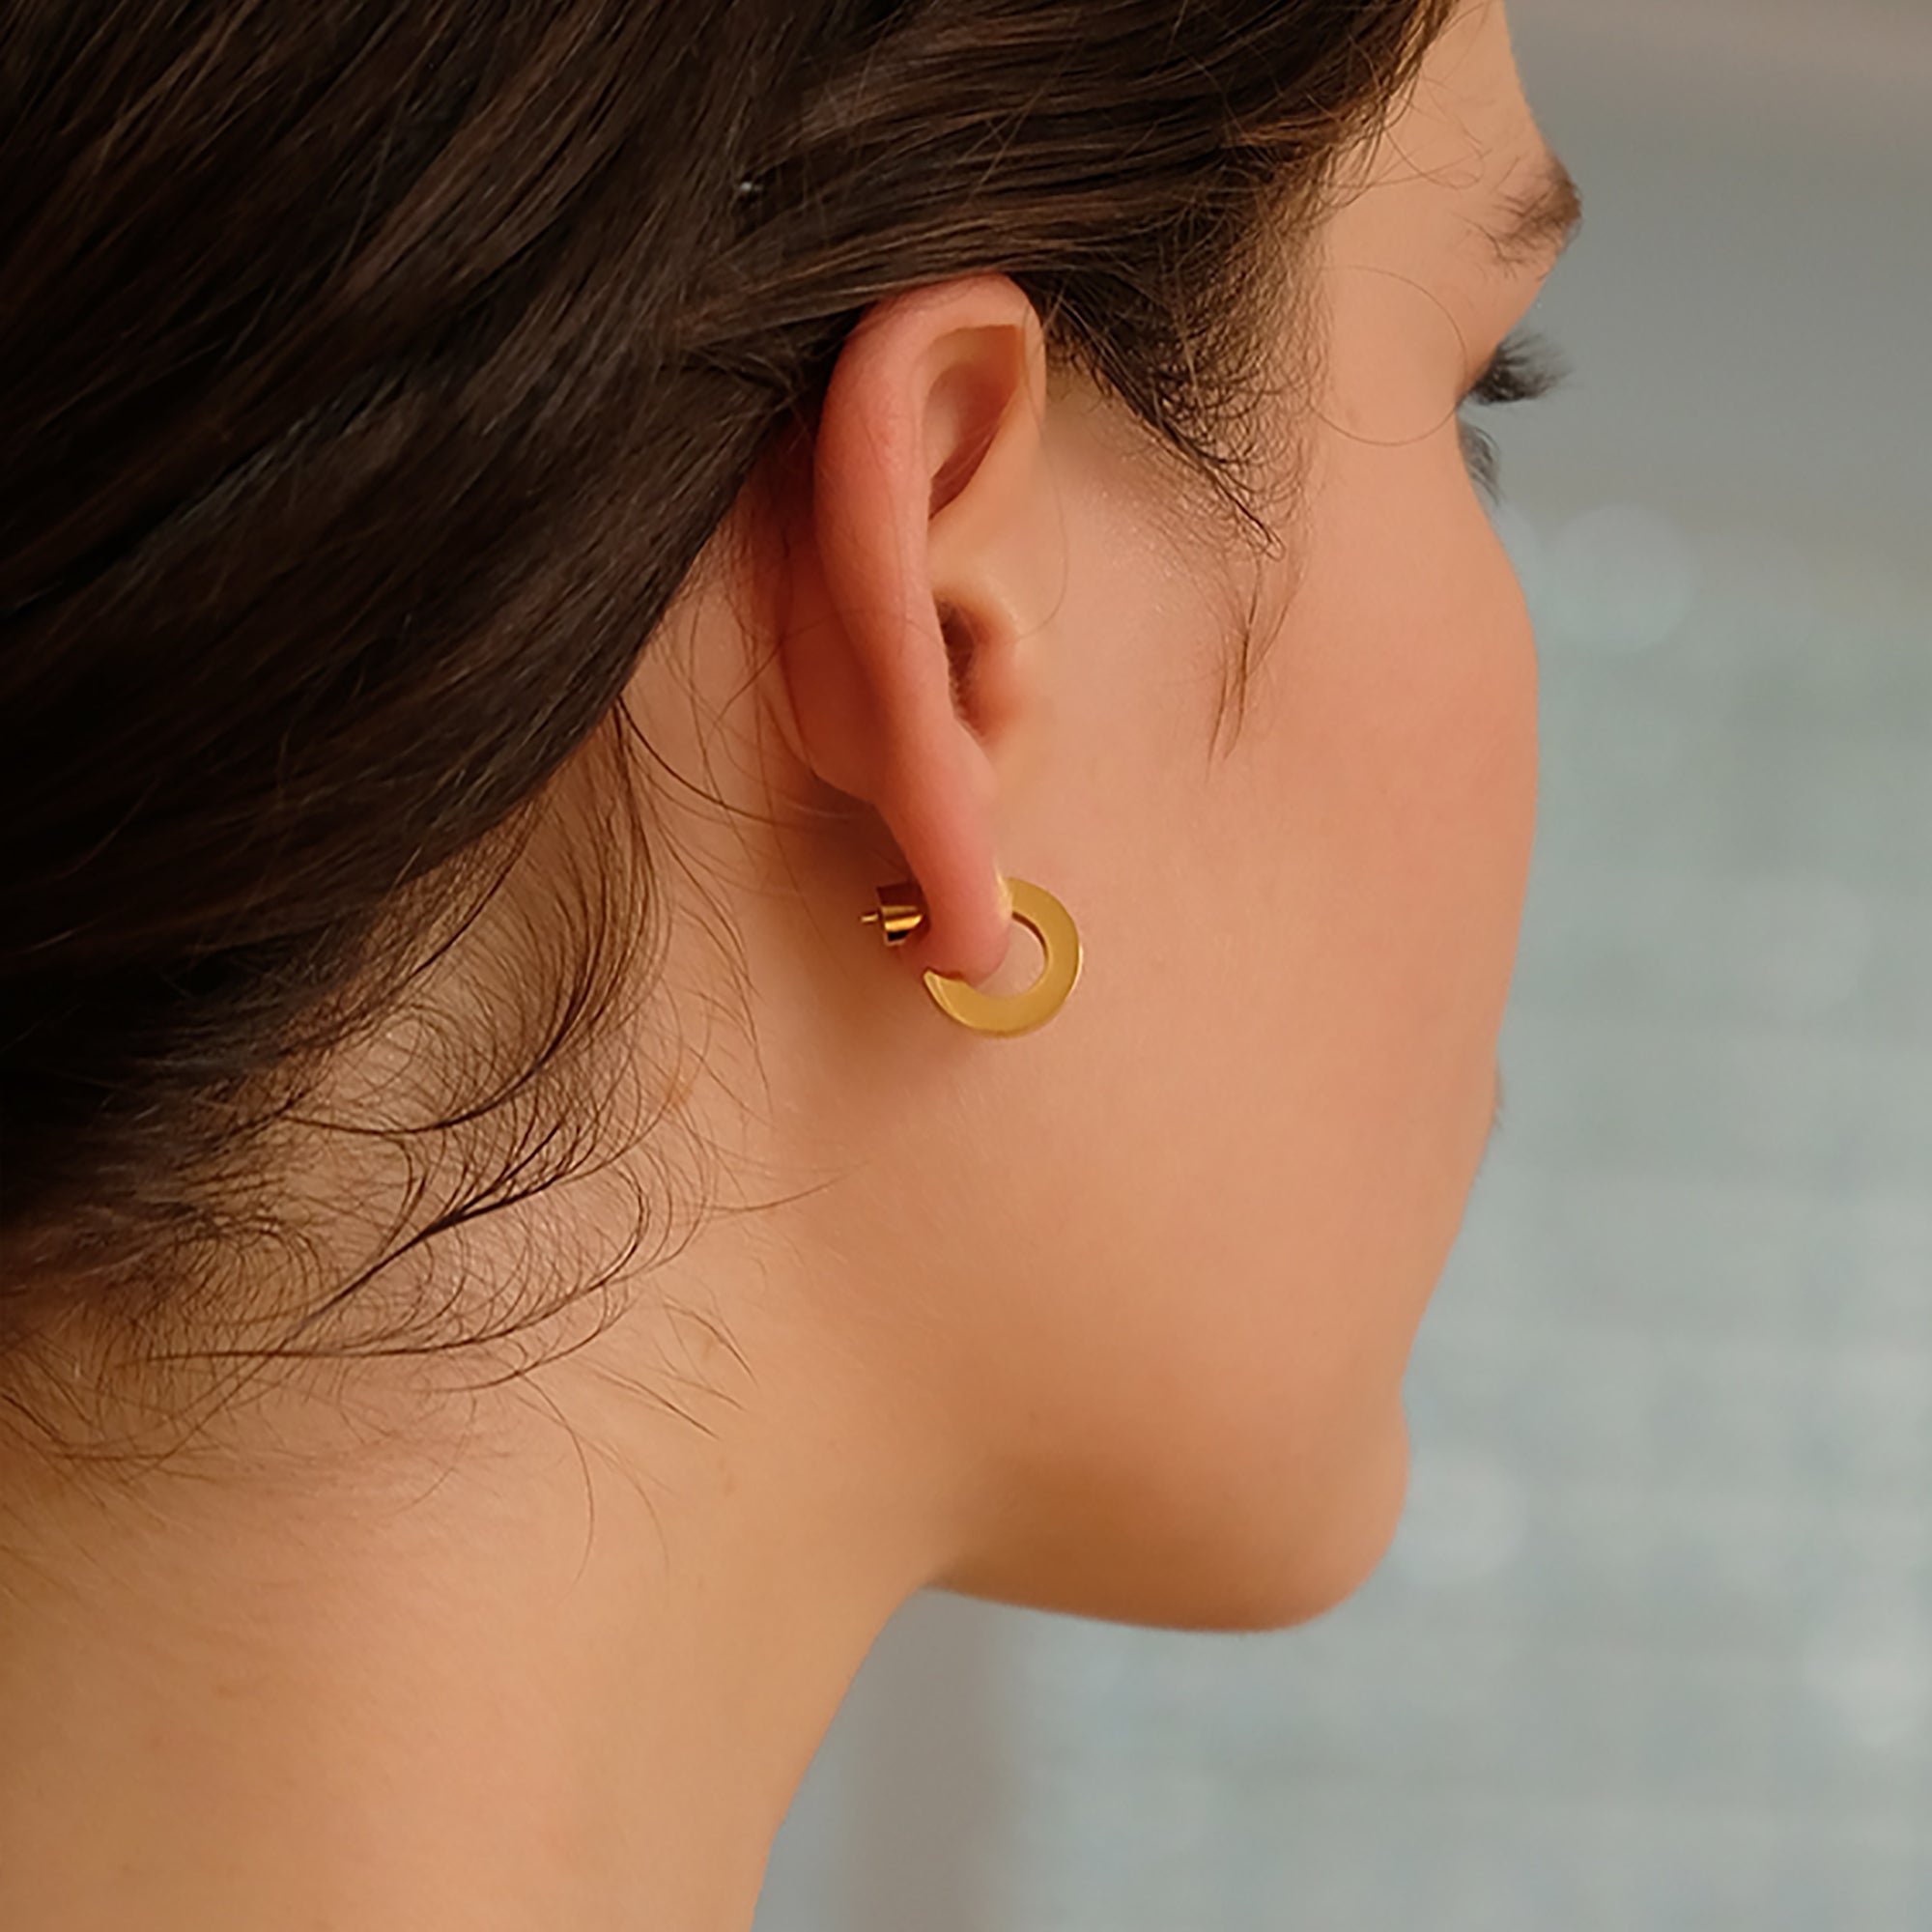 18K Gold Plated Hoop Earrings Gift wedding influencer styling KOL / Youtuber / Celebrity / Fashion Icon